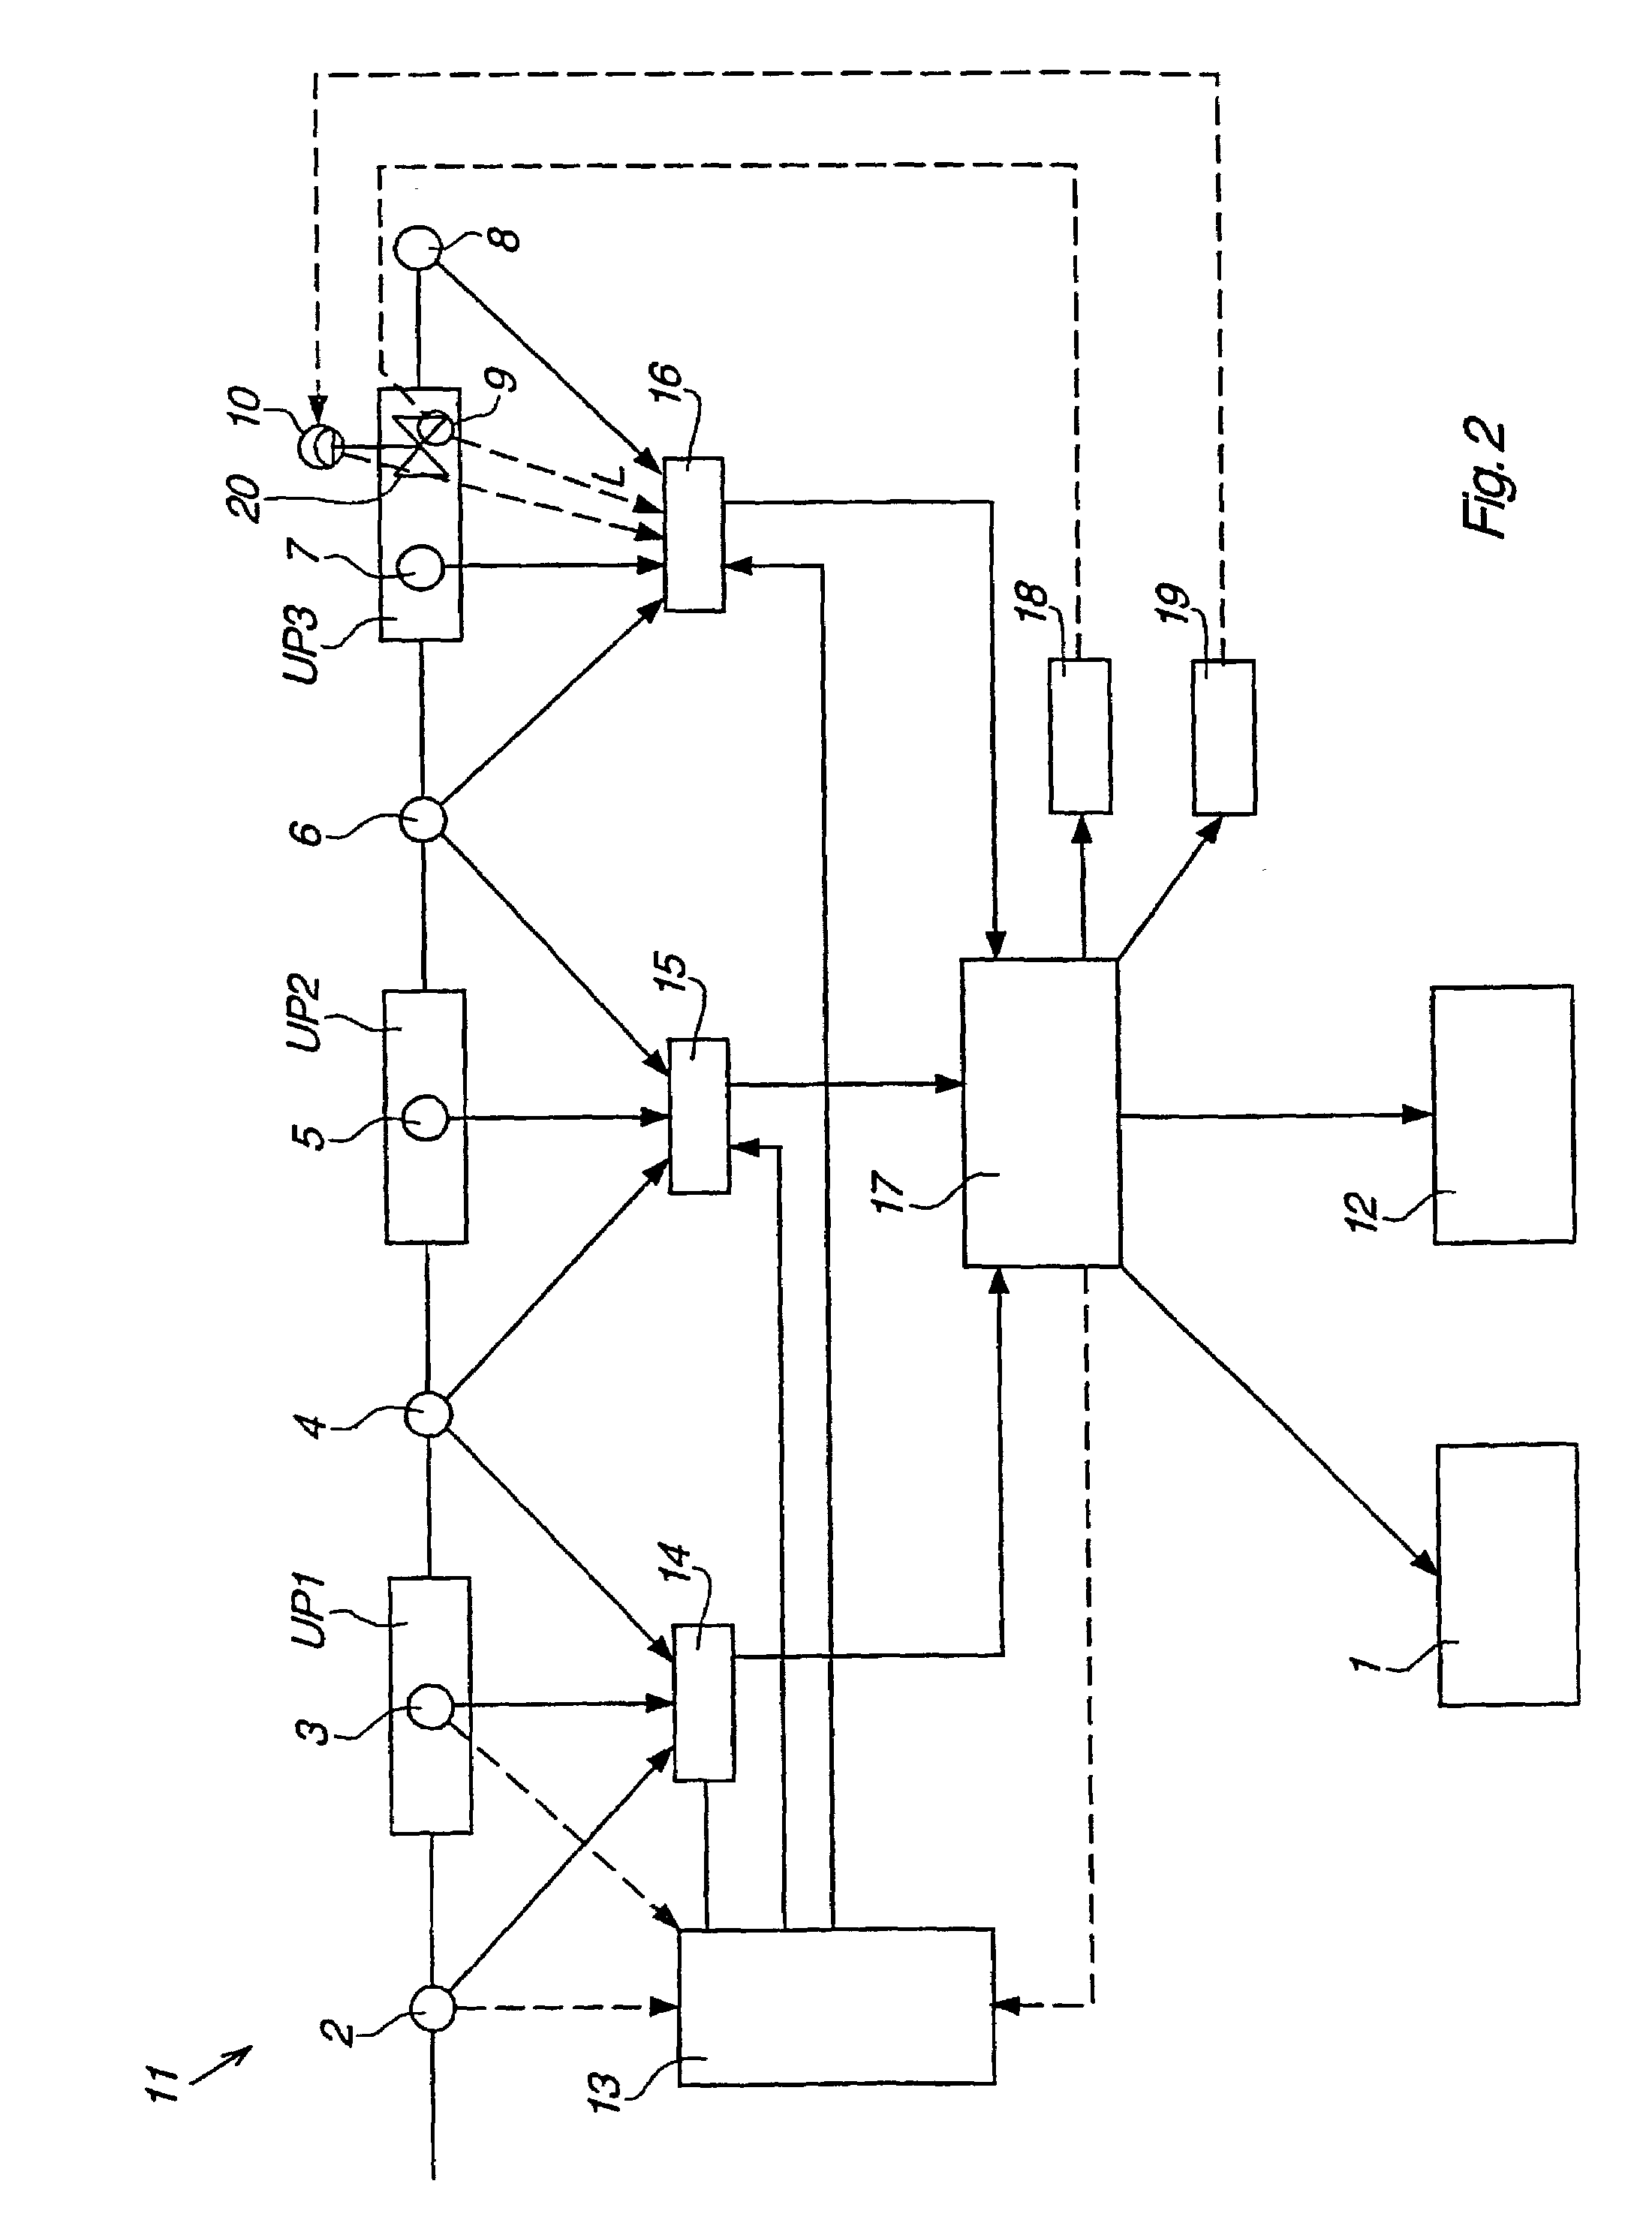 Computer based method and system for controlling an industrial process